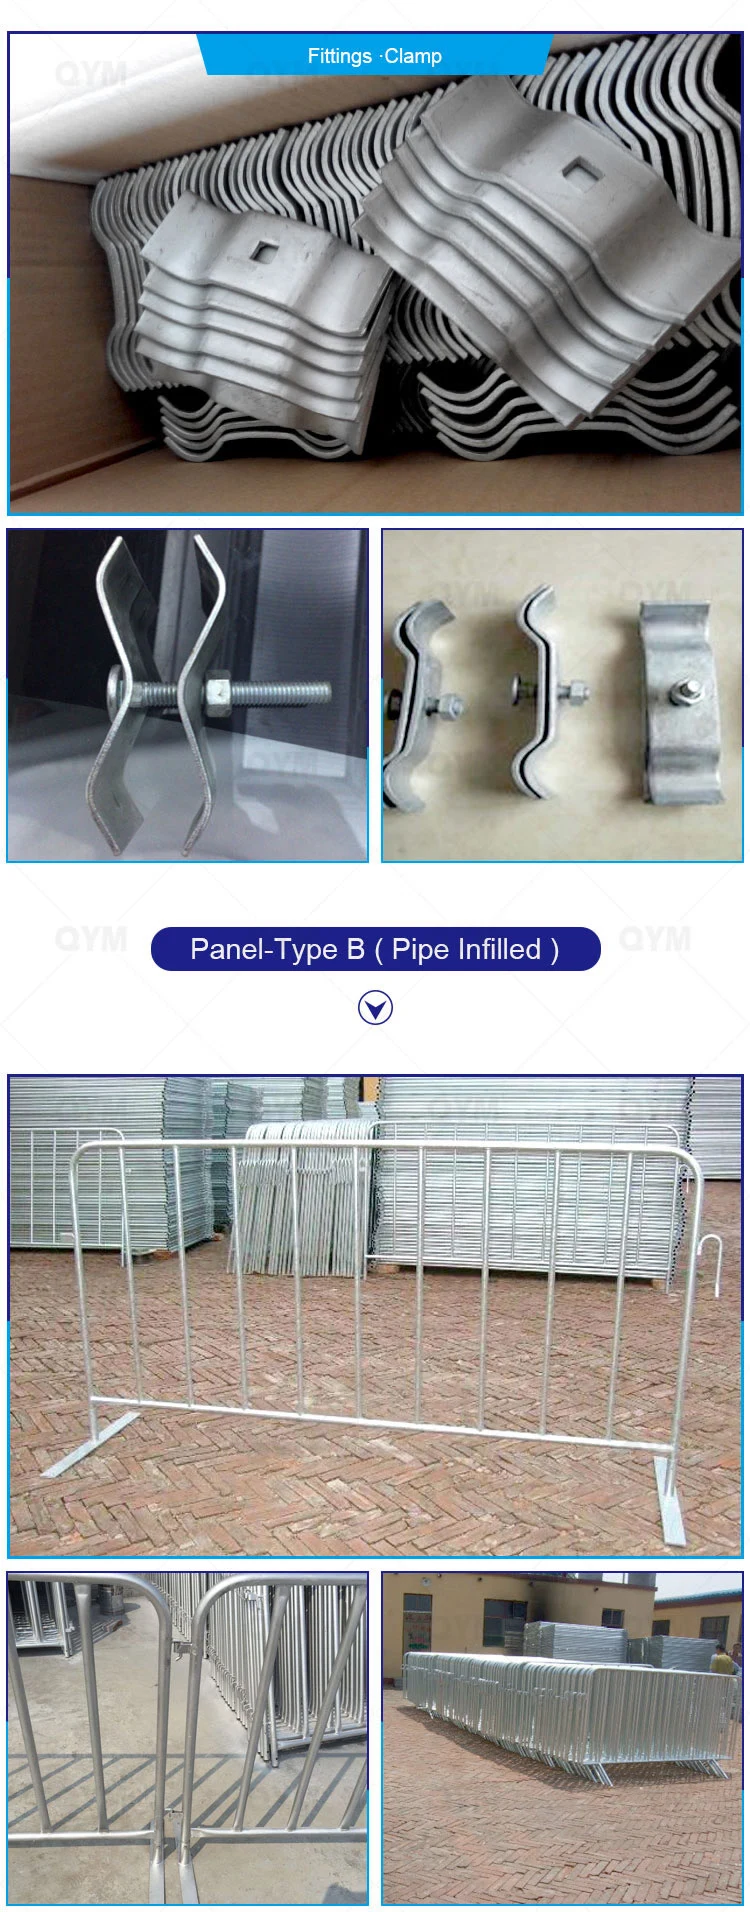 Security Swimming Temporary Fence / PVC Coated Temporary Fences for Kids